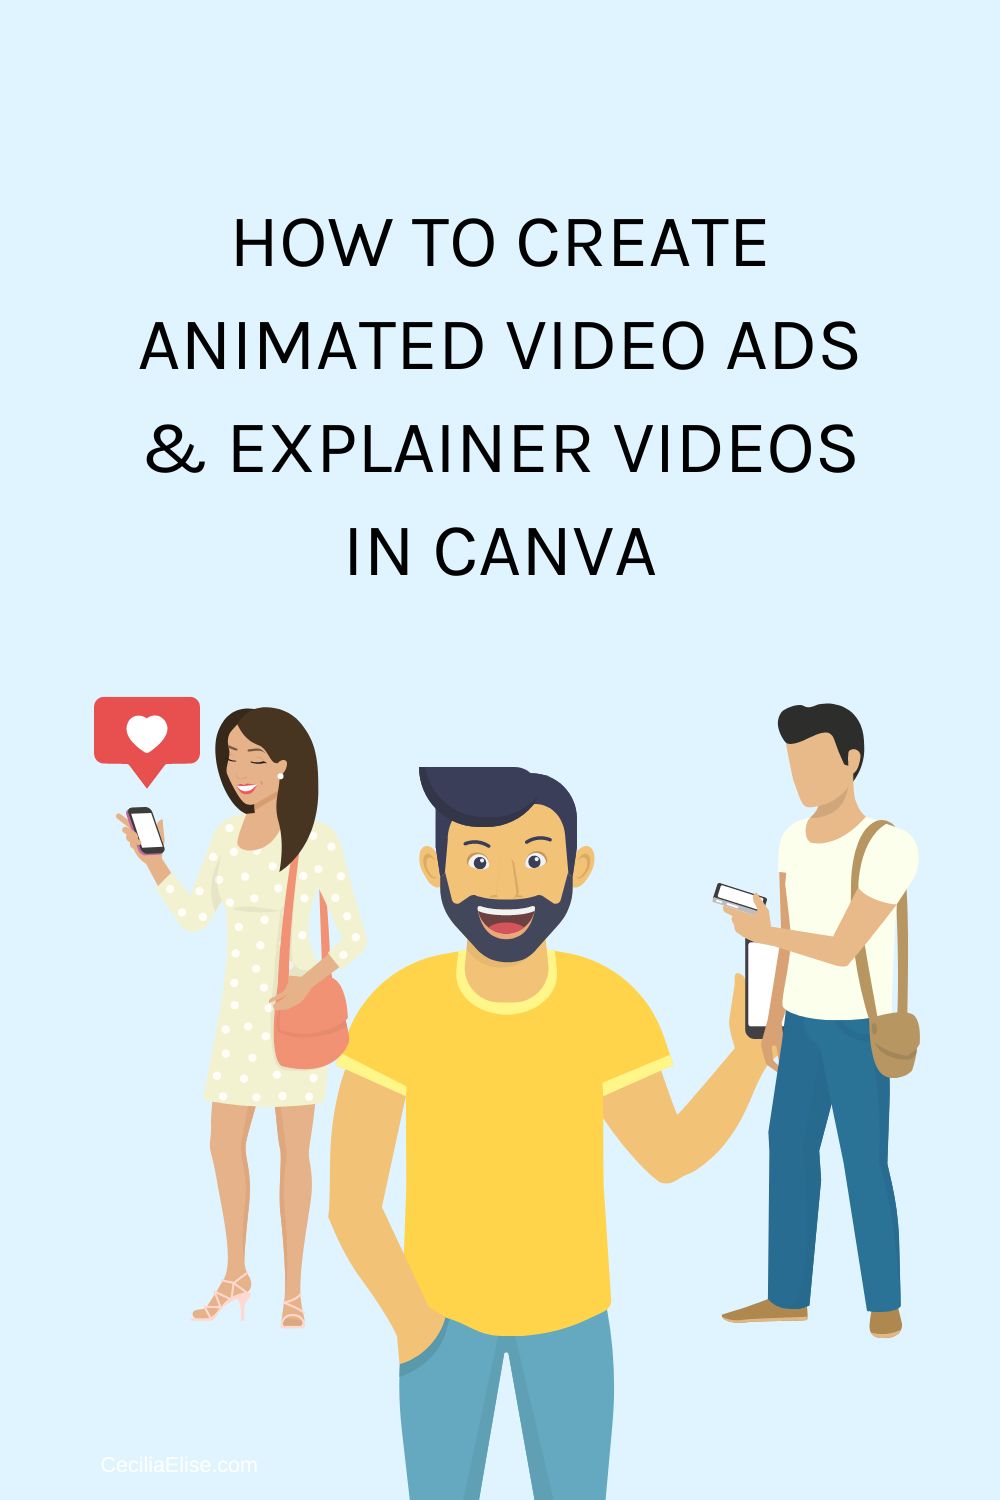 How to Create Animated Video Ads & Explainer Videos in Canva